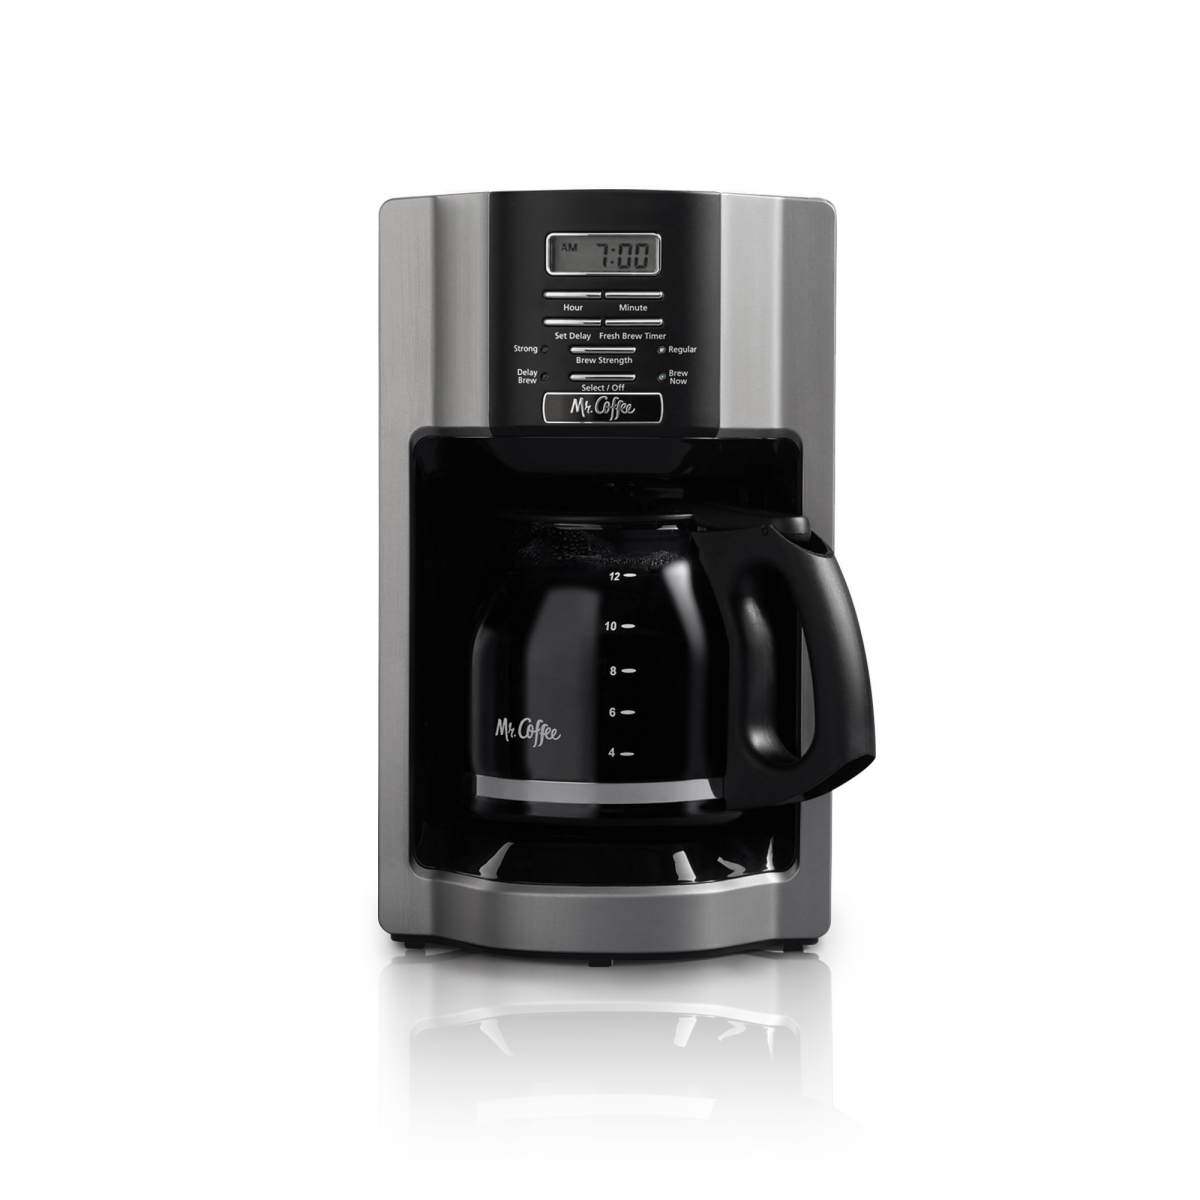 Mr Coffee 096116936531 12 Cup Rapid Brew Digital Programmable Coffee Maker, Black & Stainless